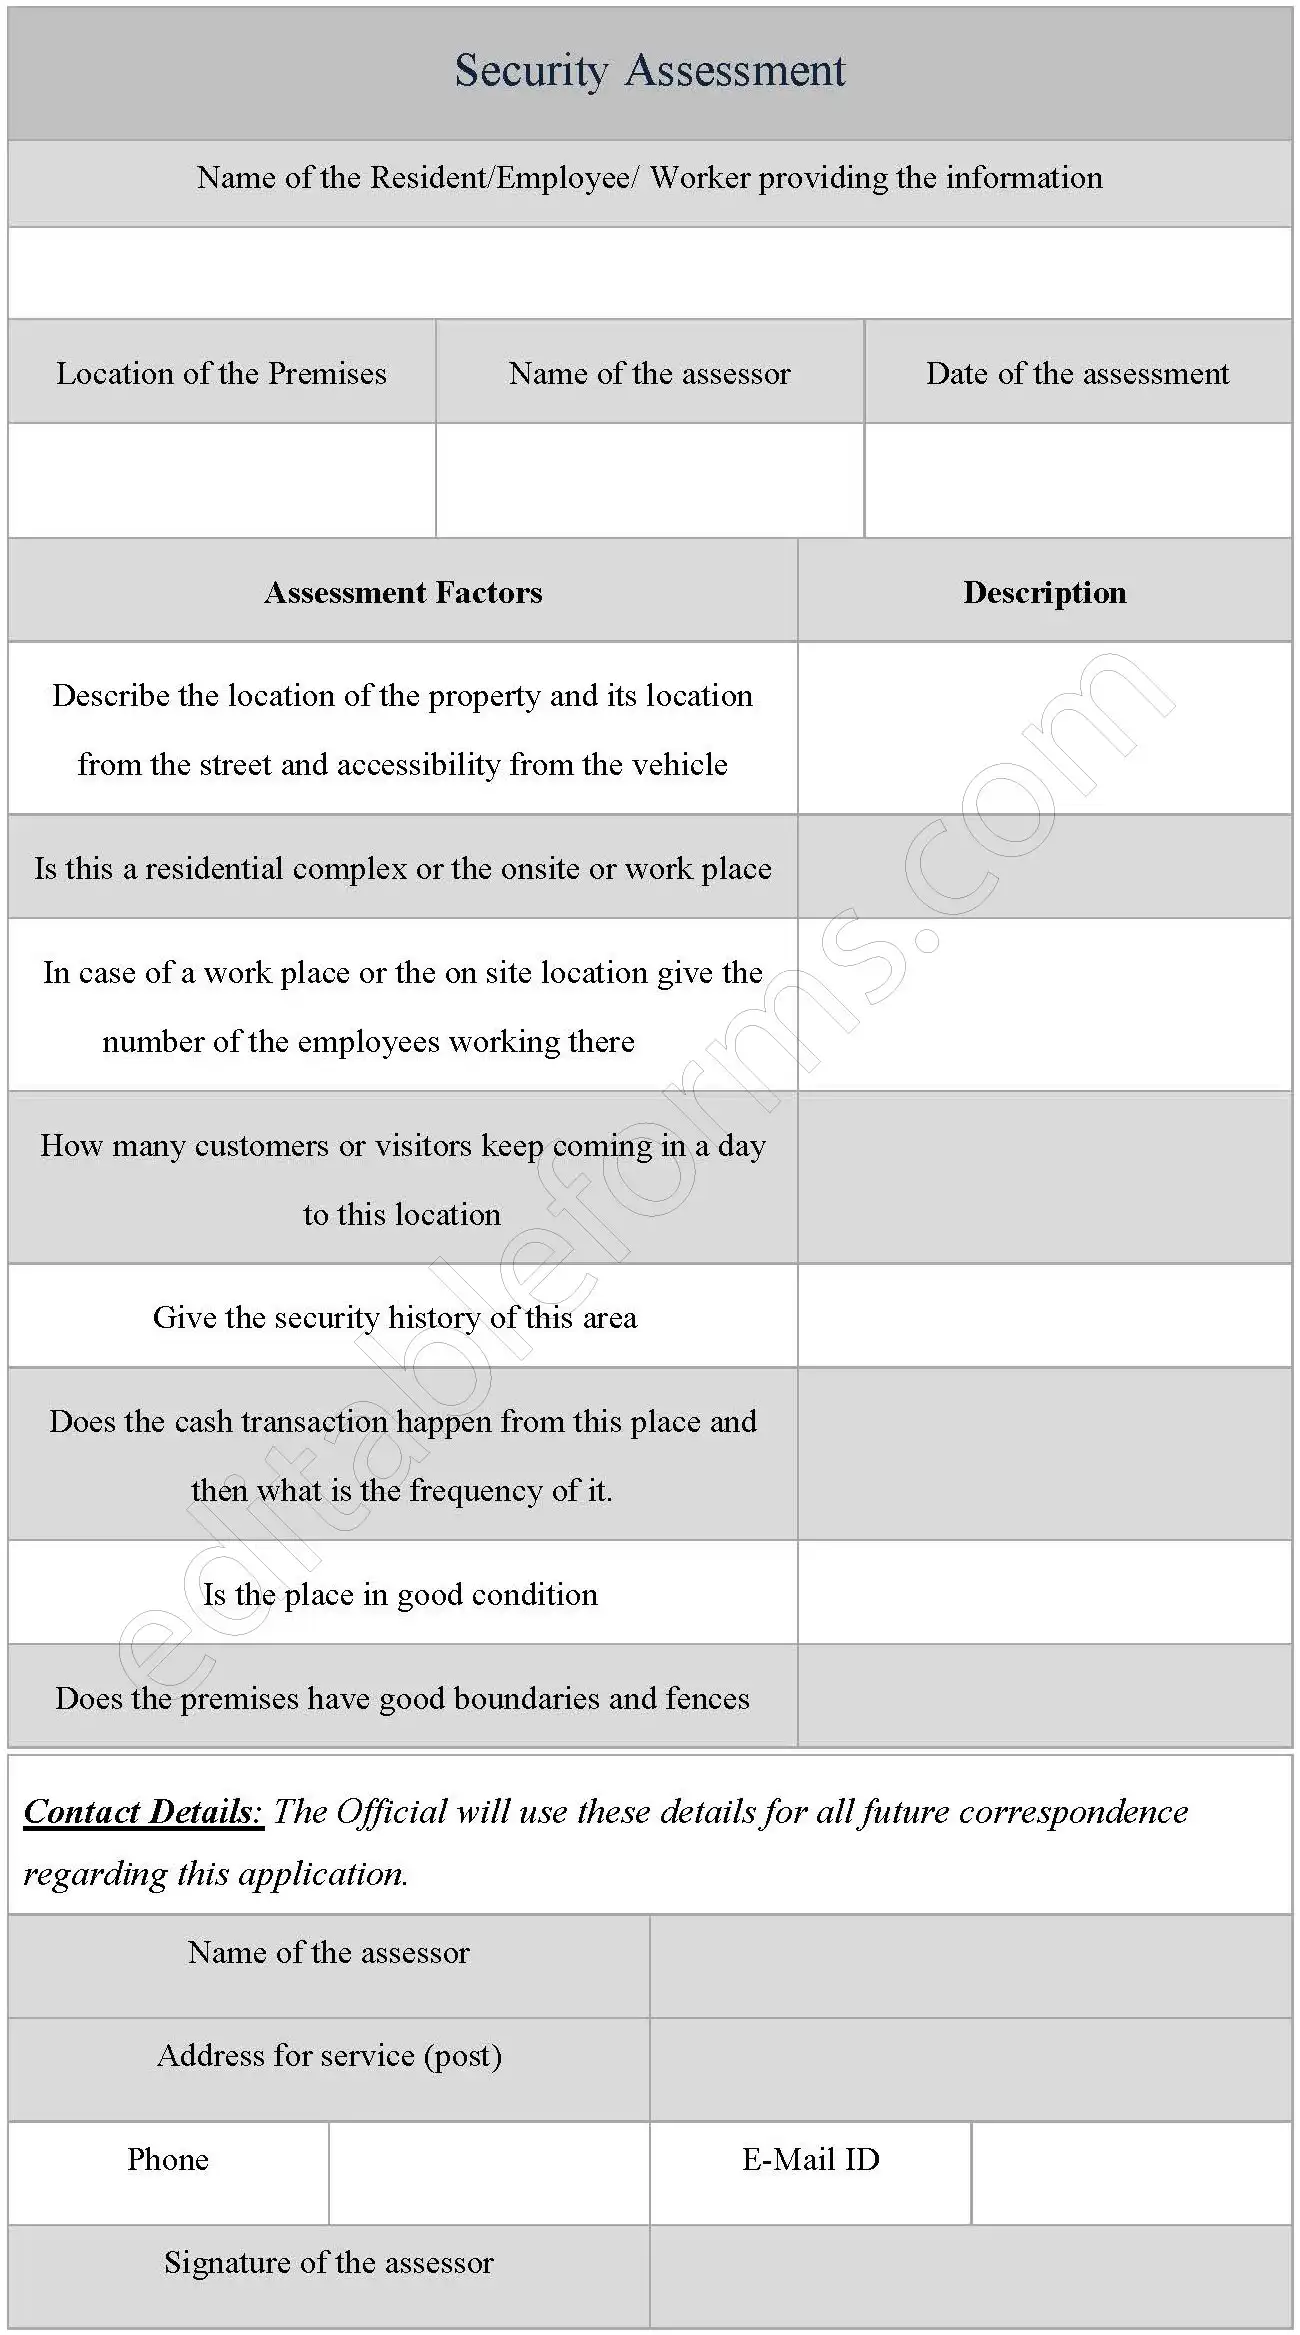 Security Assessment Fillable PDF Form